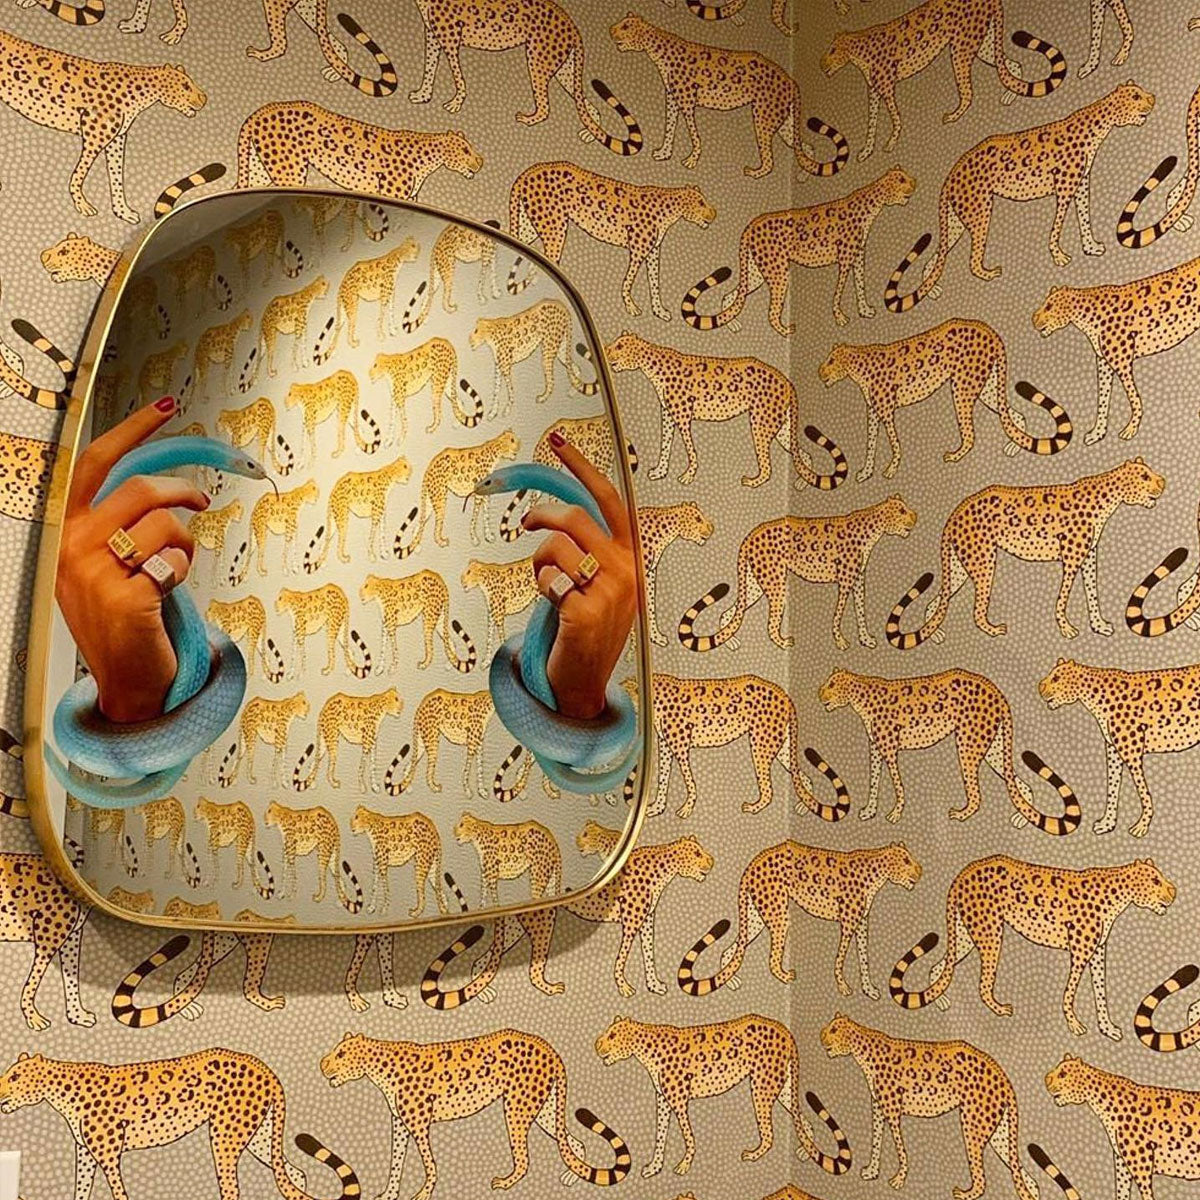 Seletti X Toiletpaper Gold Frame Hands With Snakes Mirror